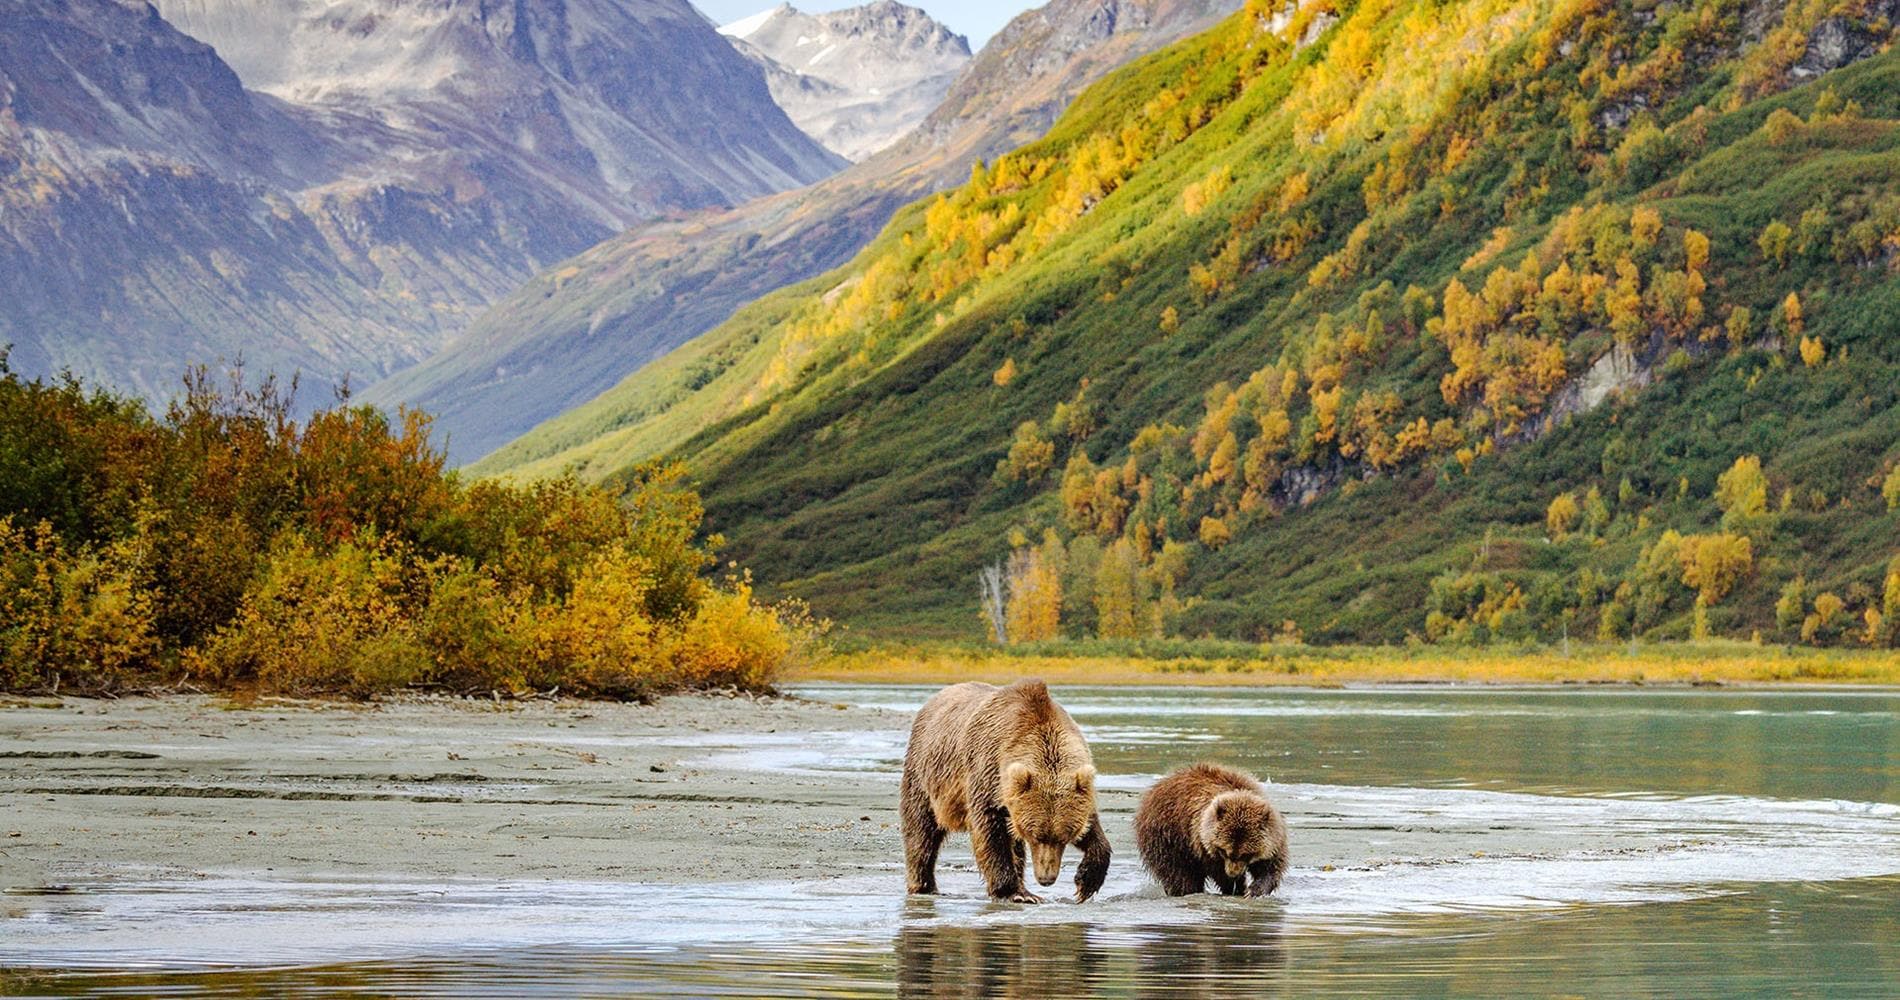 Mother and child bear in river with mountains behind, Lake Clark National Park and Preserve, Alaska